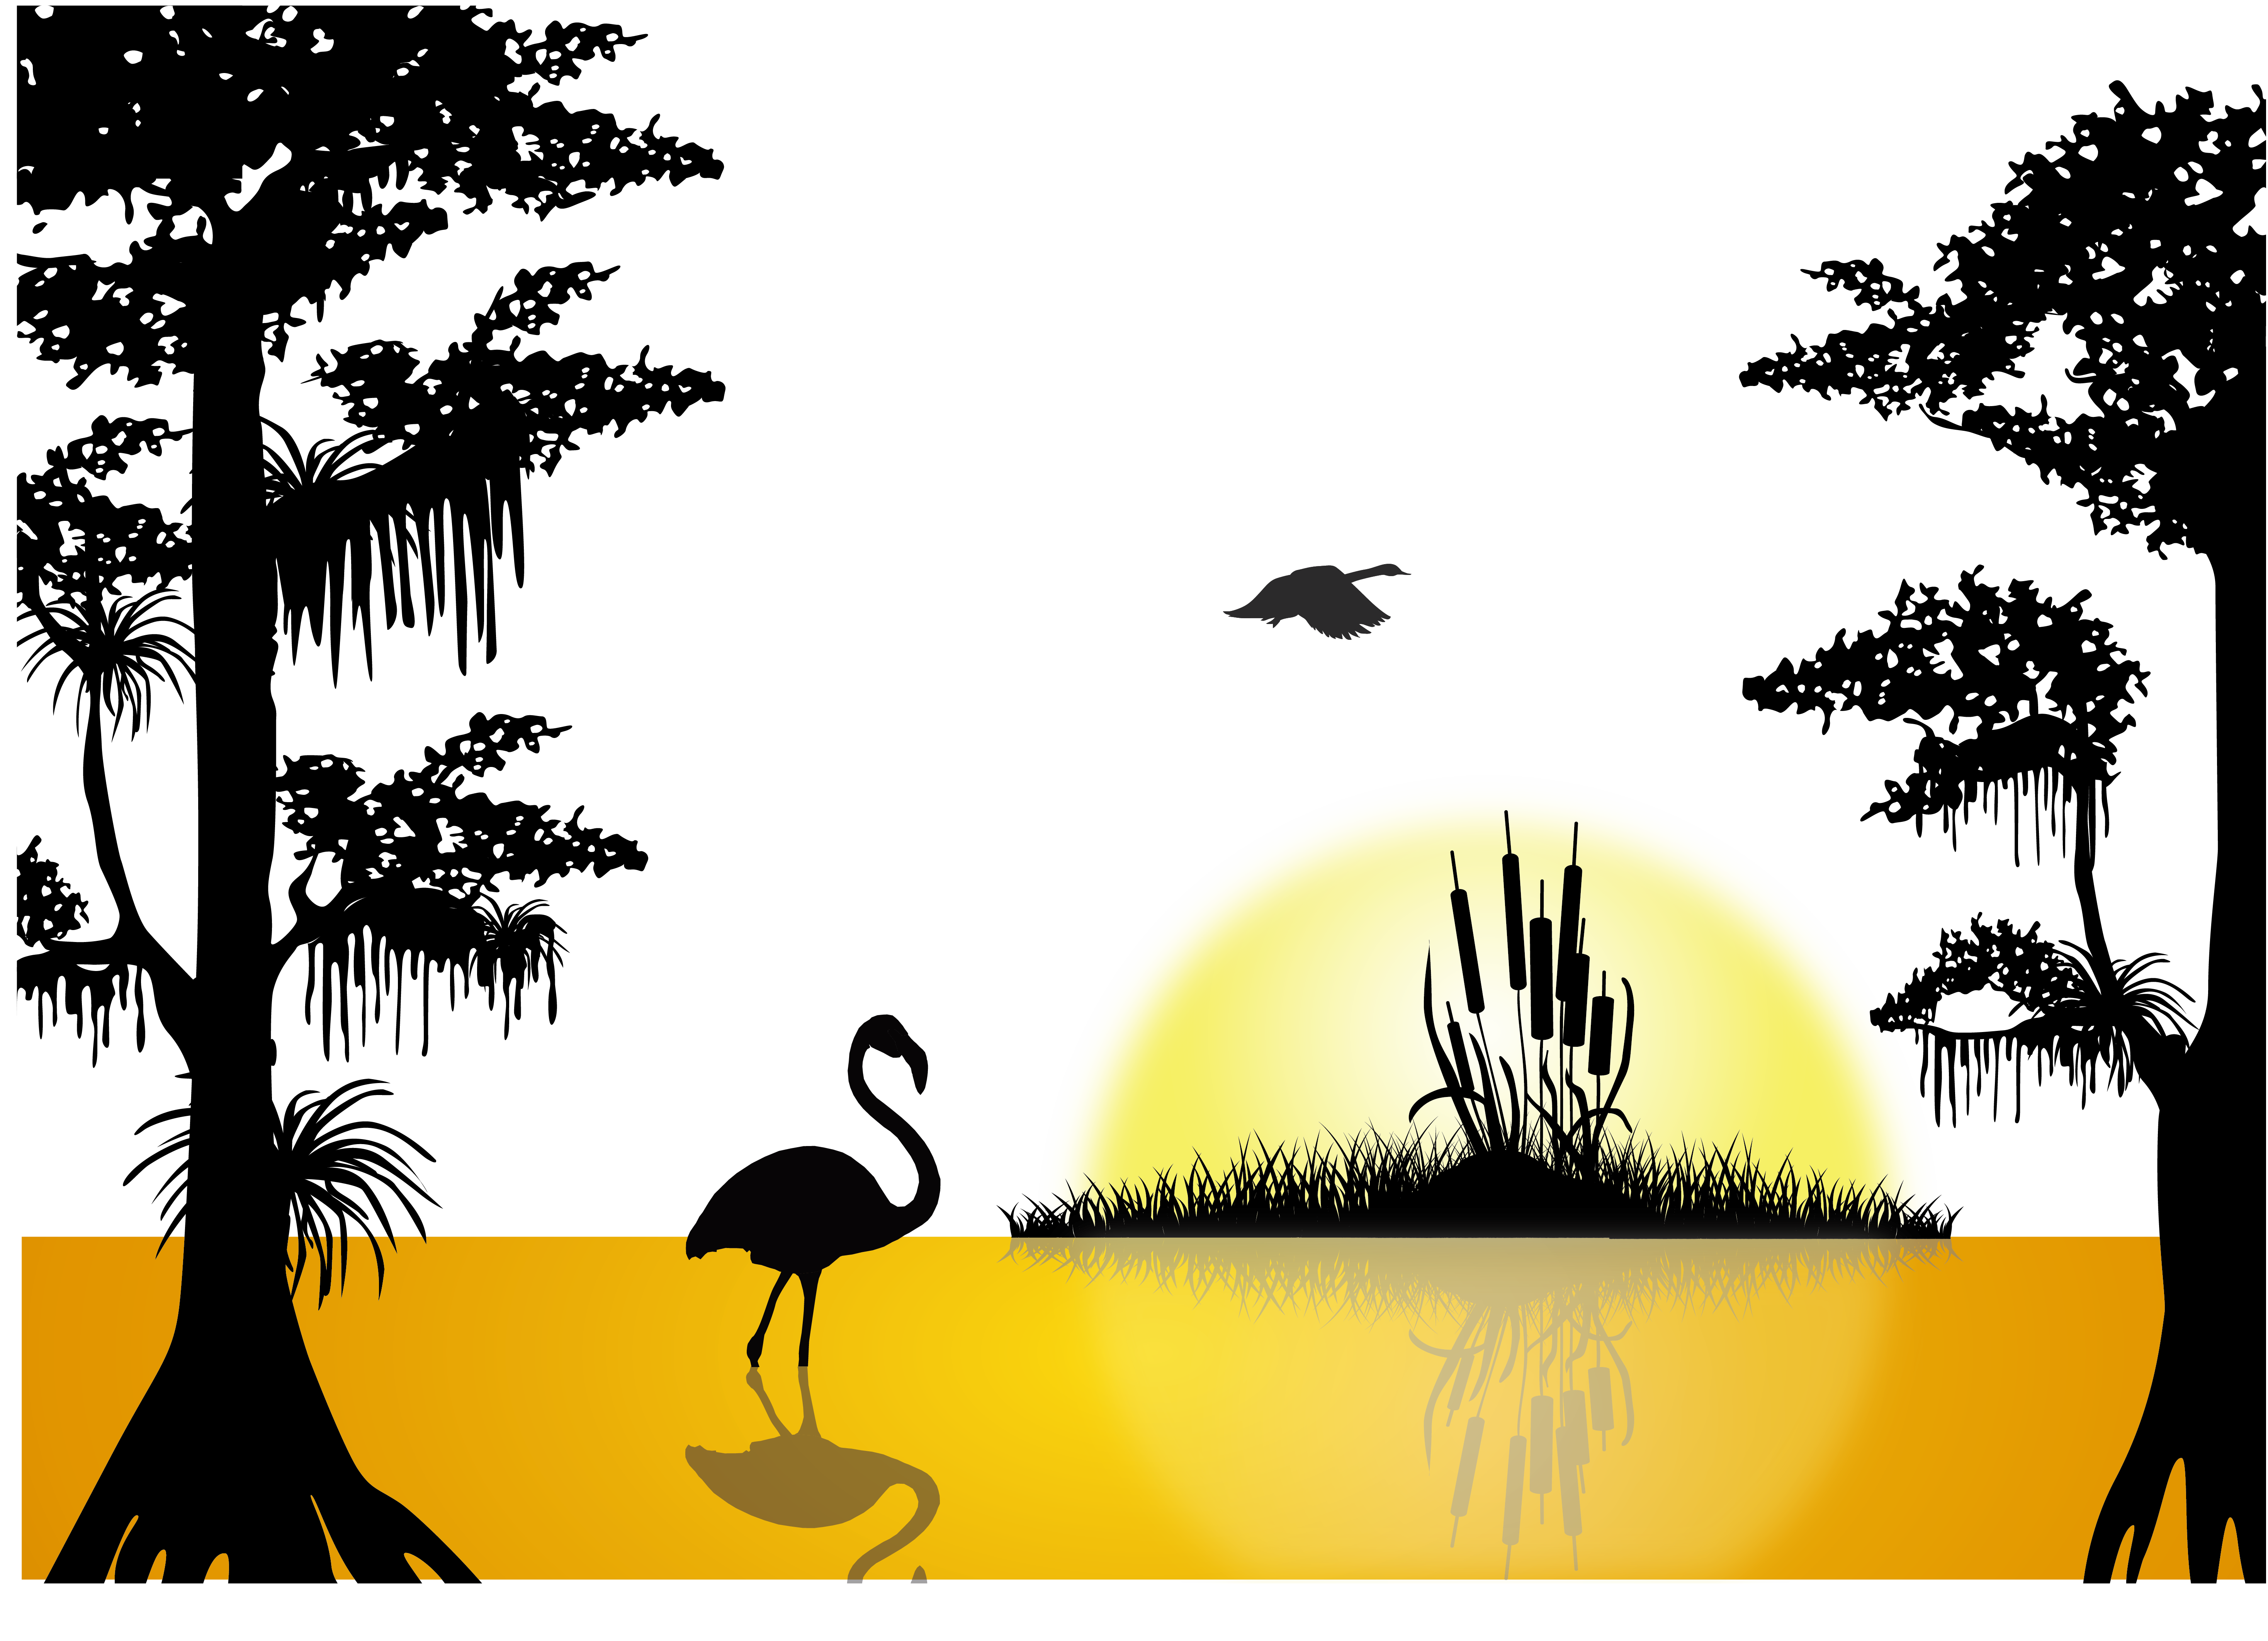 Silhouette at getdrawings com. Sunset clipart lake sunset